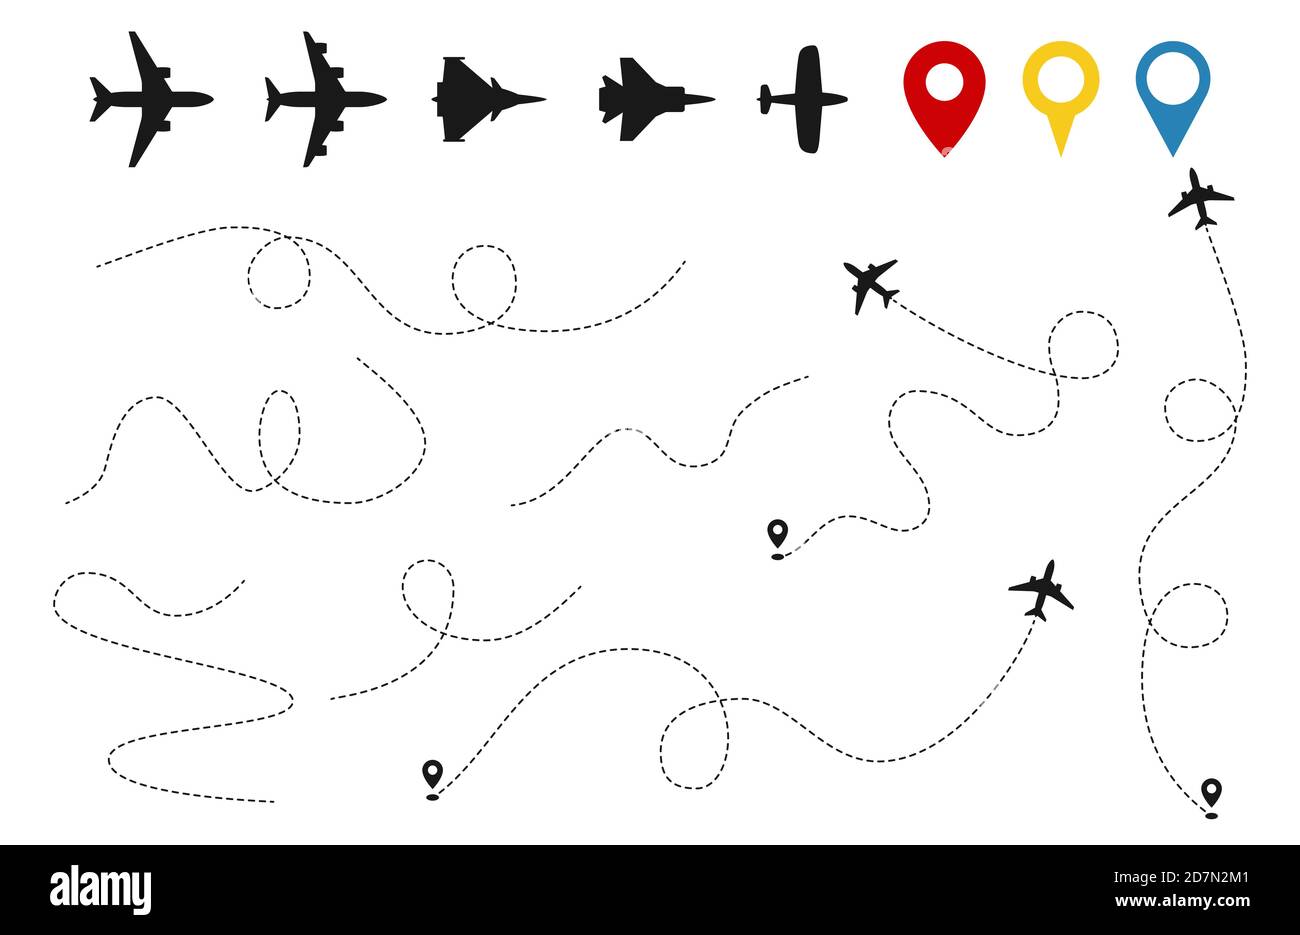 Plane paths vector. Aircraft tracking, planes silhouettes, location pins isolated on white background. Illustration of route flight line, air jet travel Stock Vector